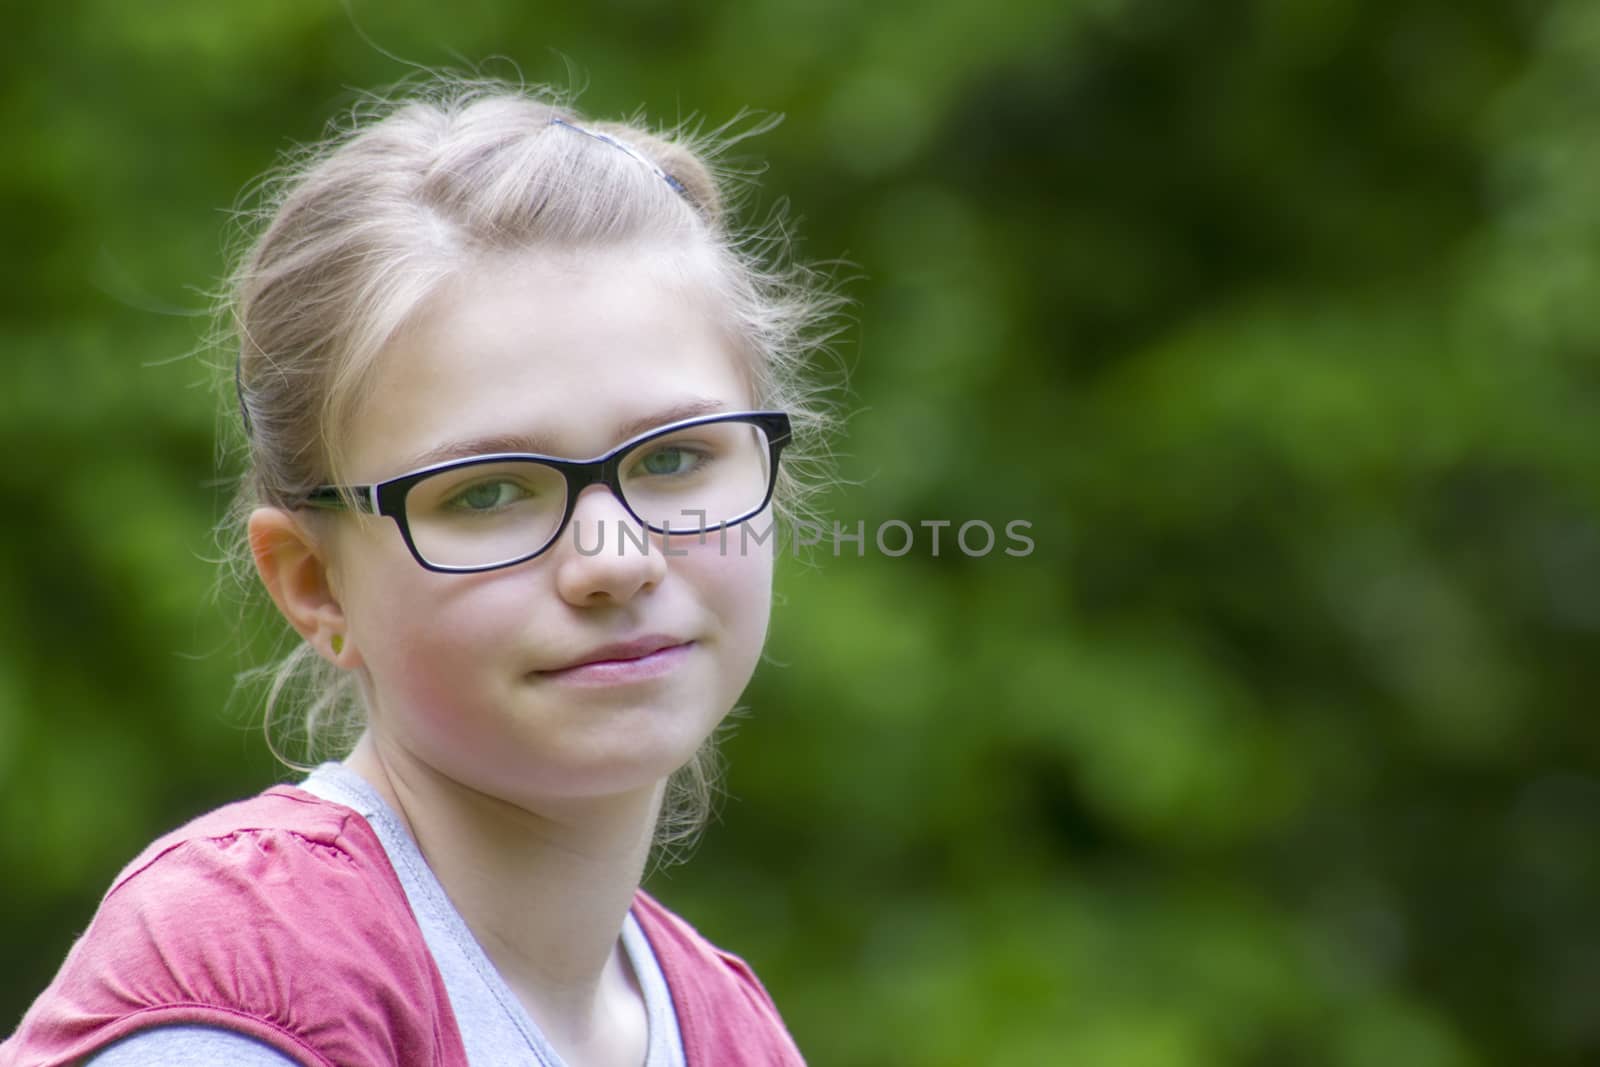 Young girl in park in spring day - portrait by miradrozdowski